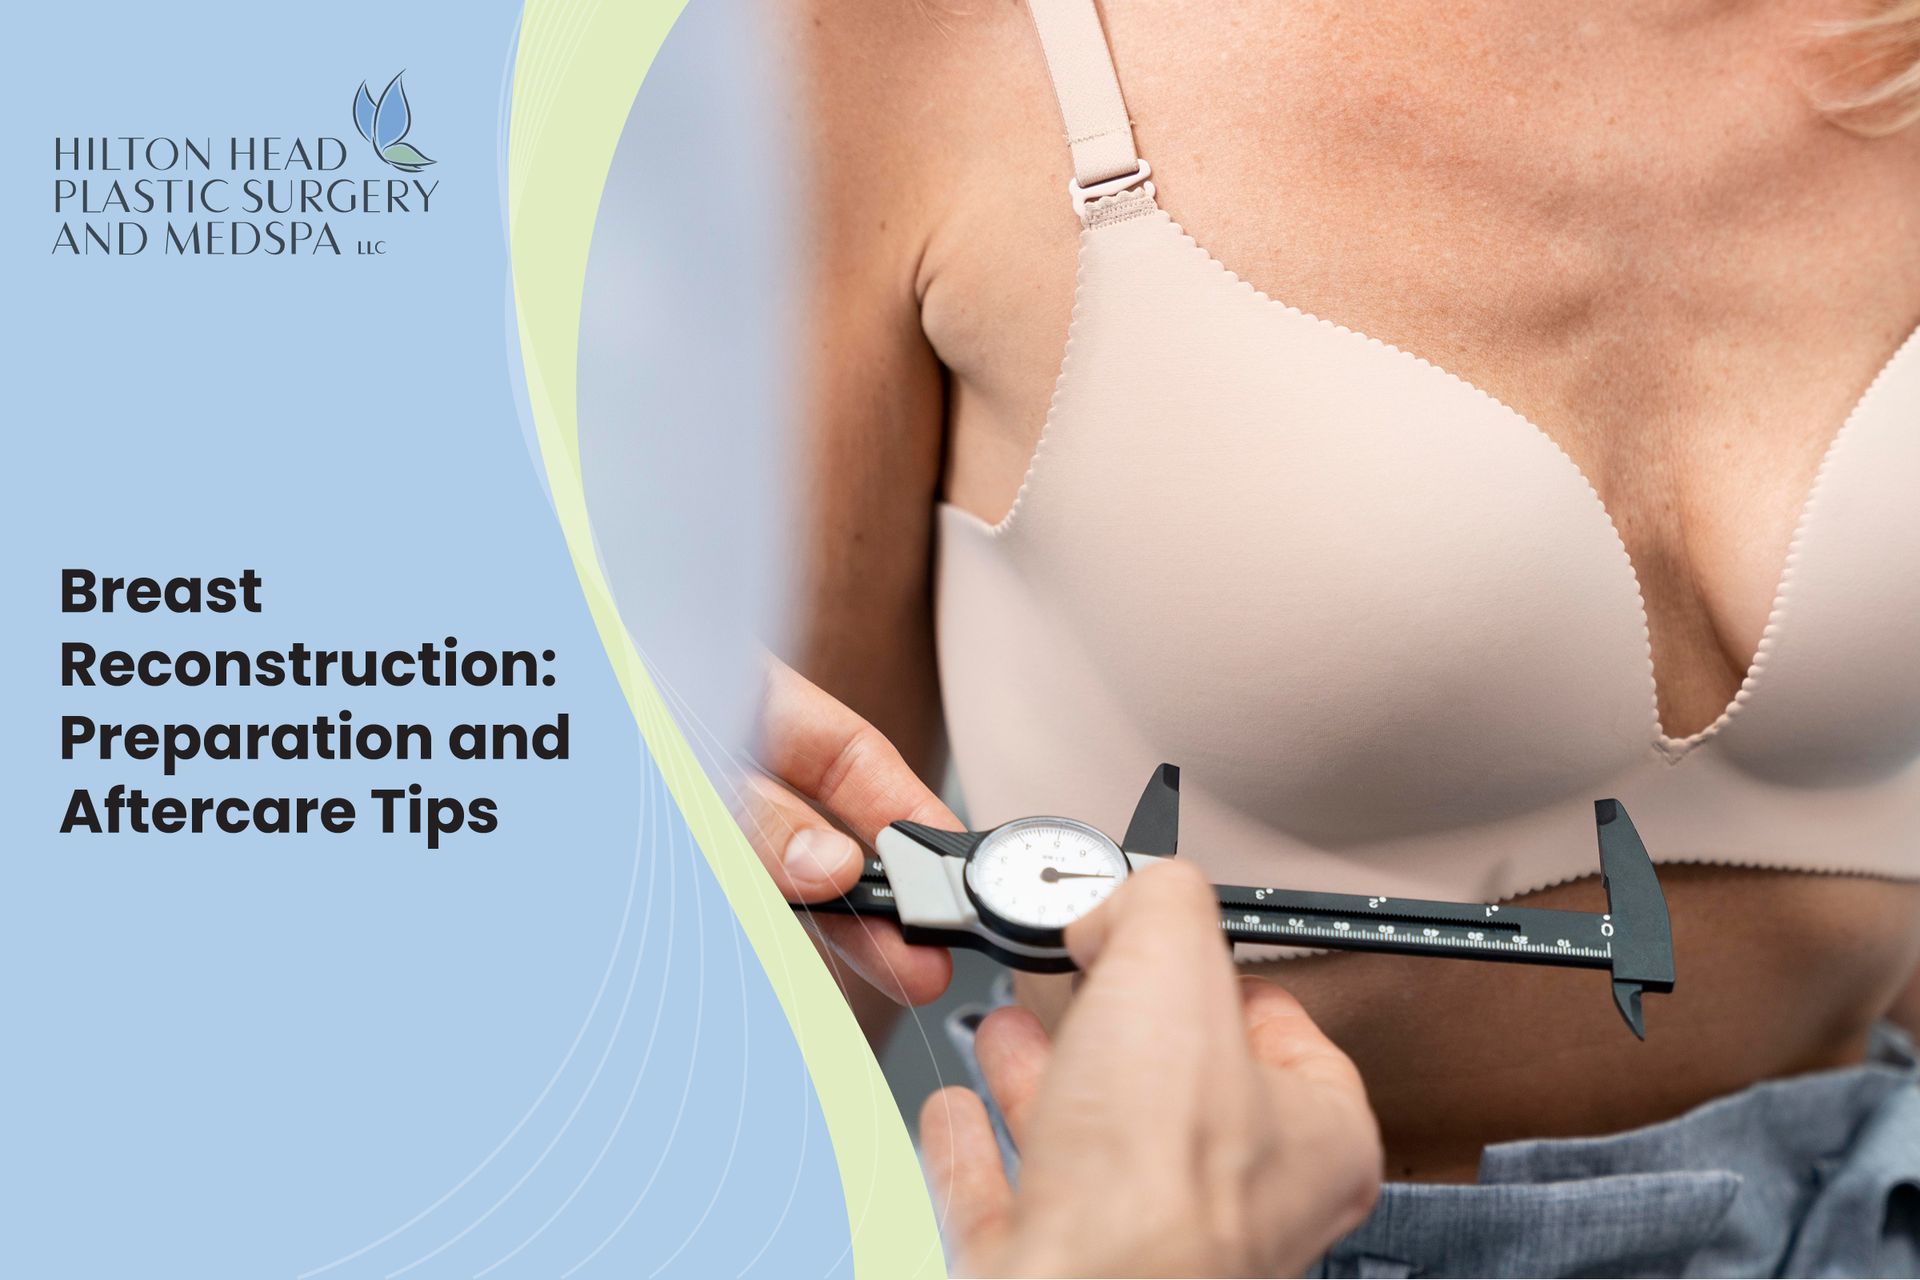 Breast Reconstruction: Preparation and Aftercare Tips